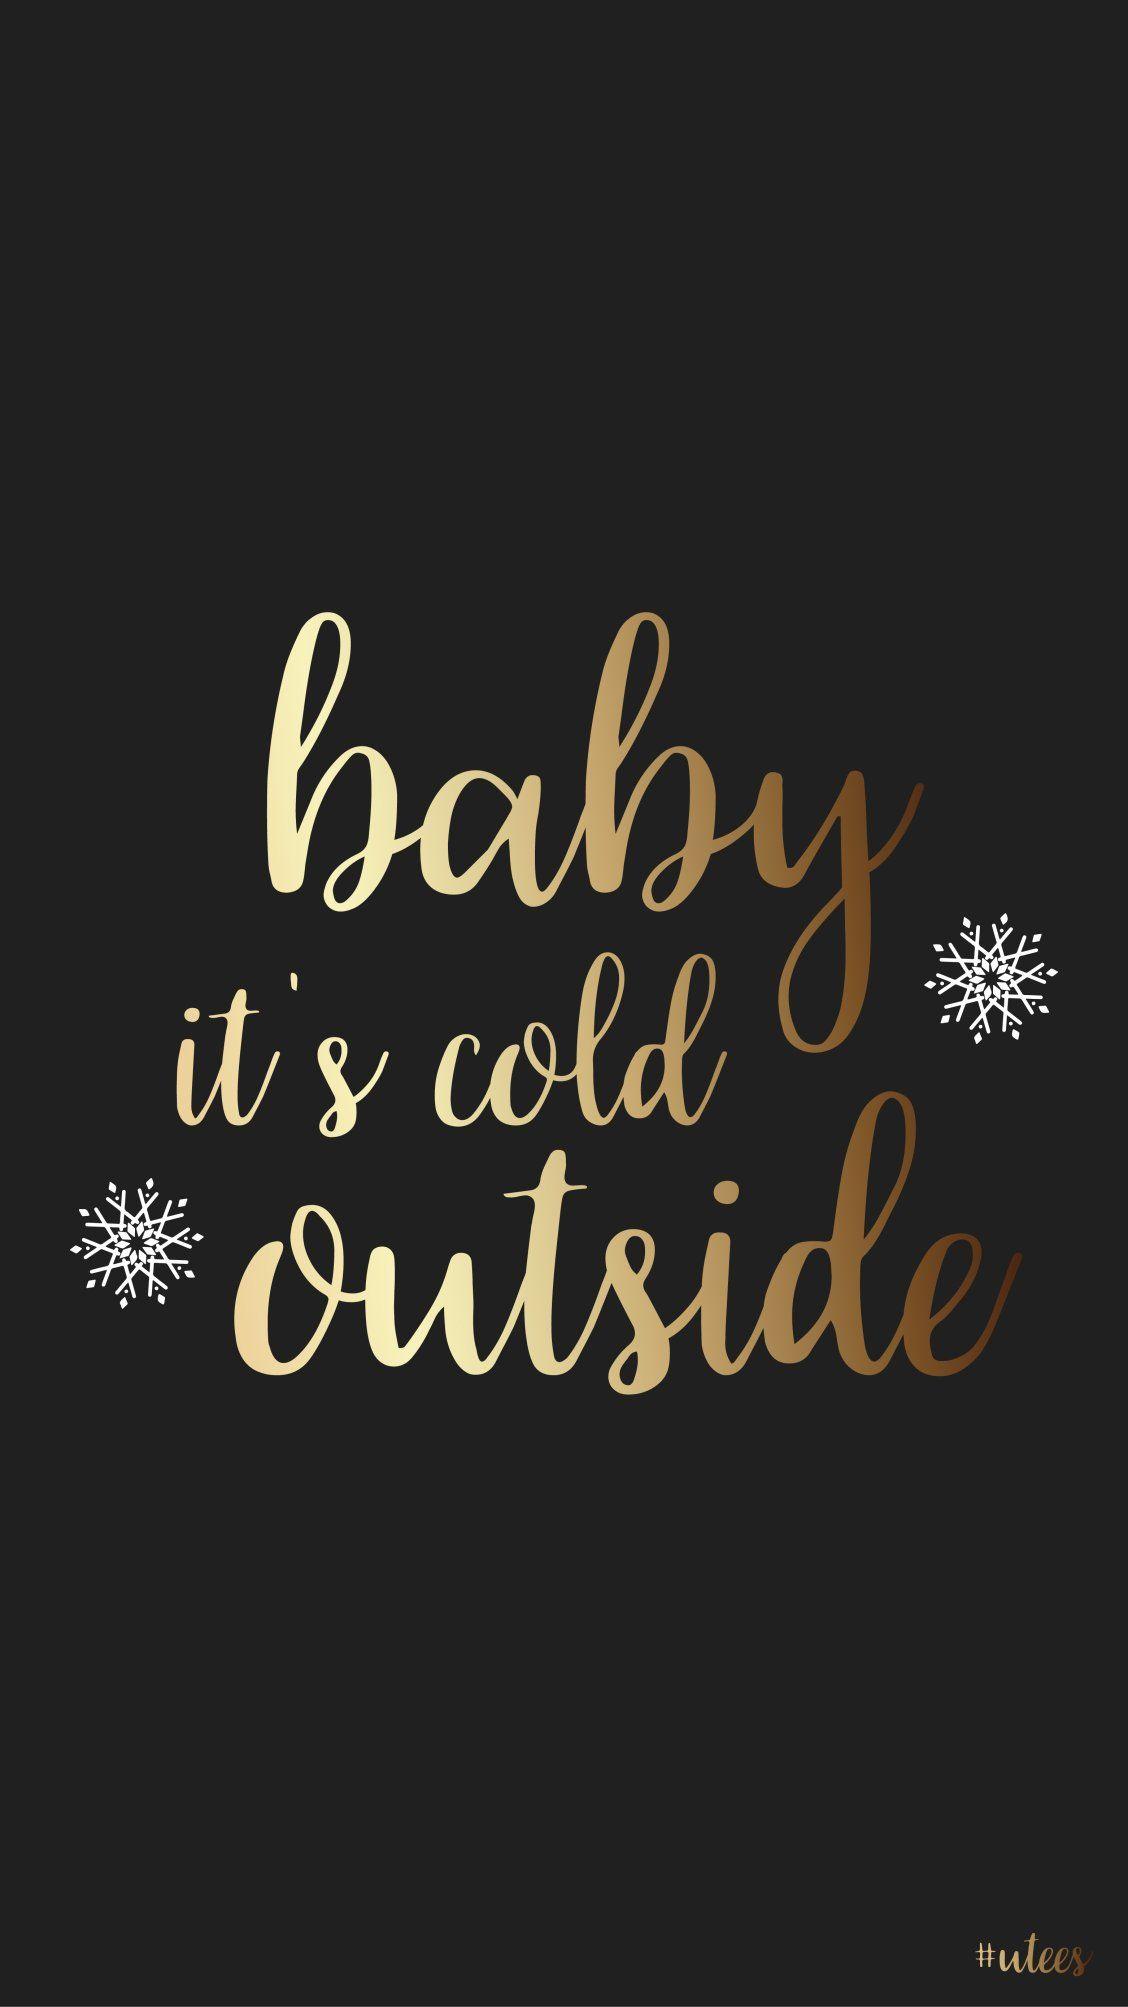 iPhone background I baby its cold outside I winter phone